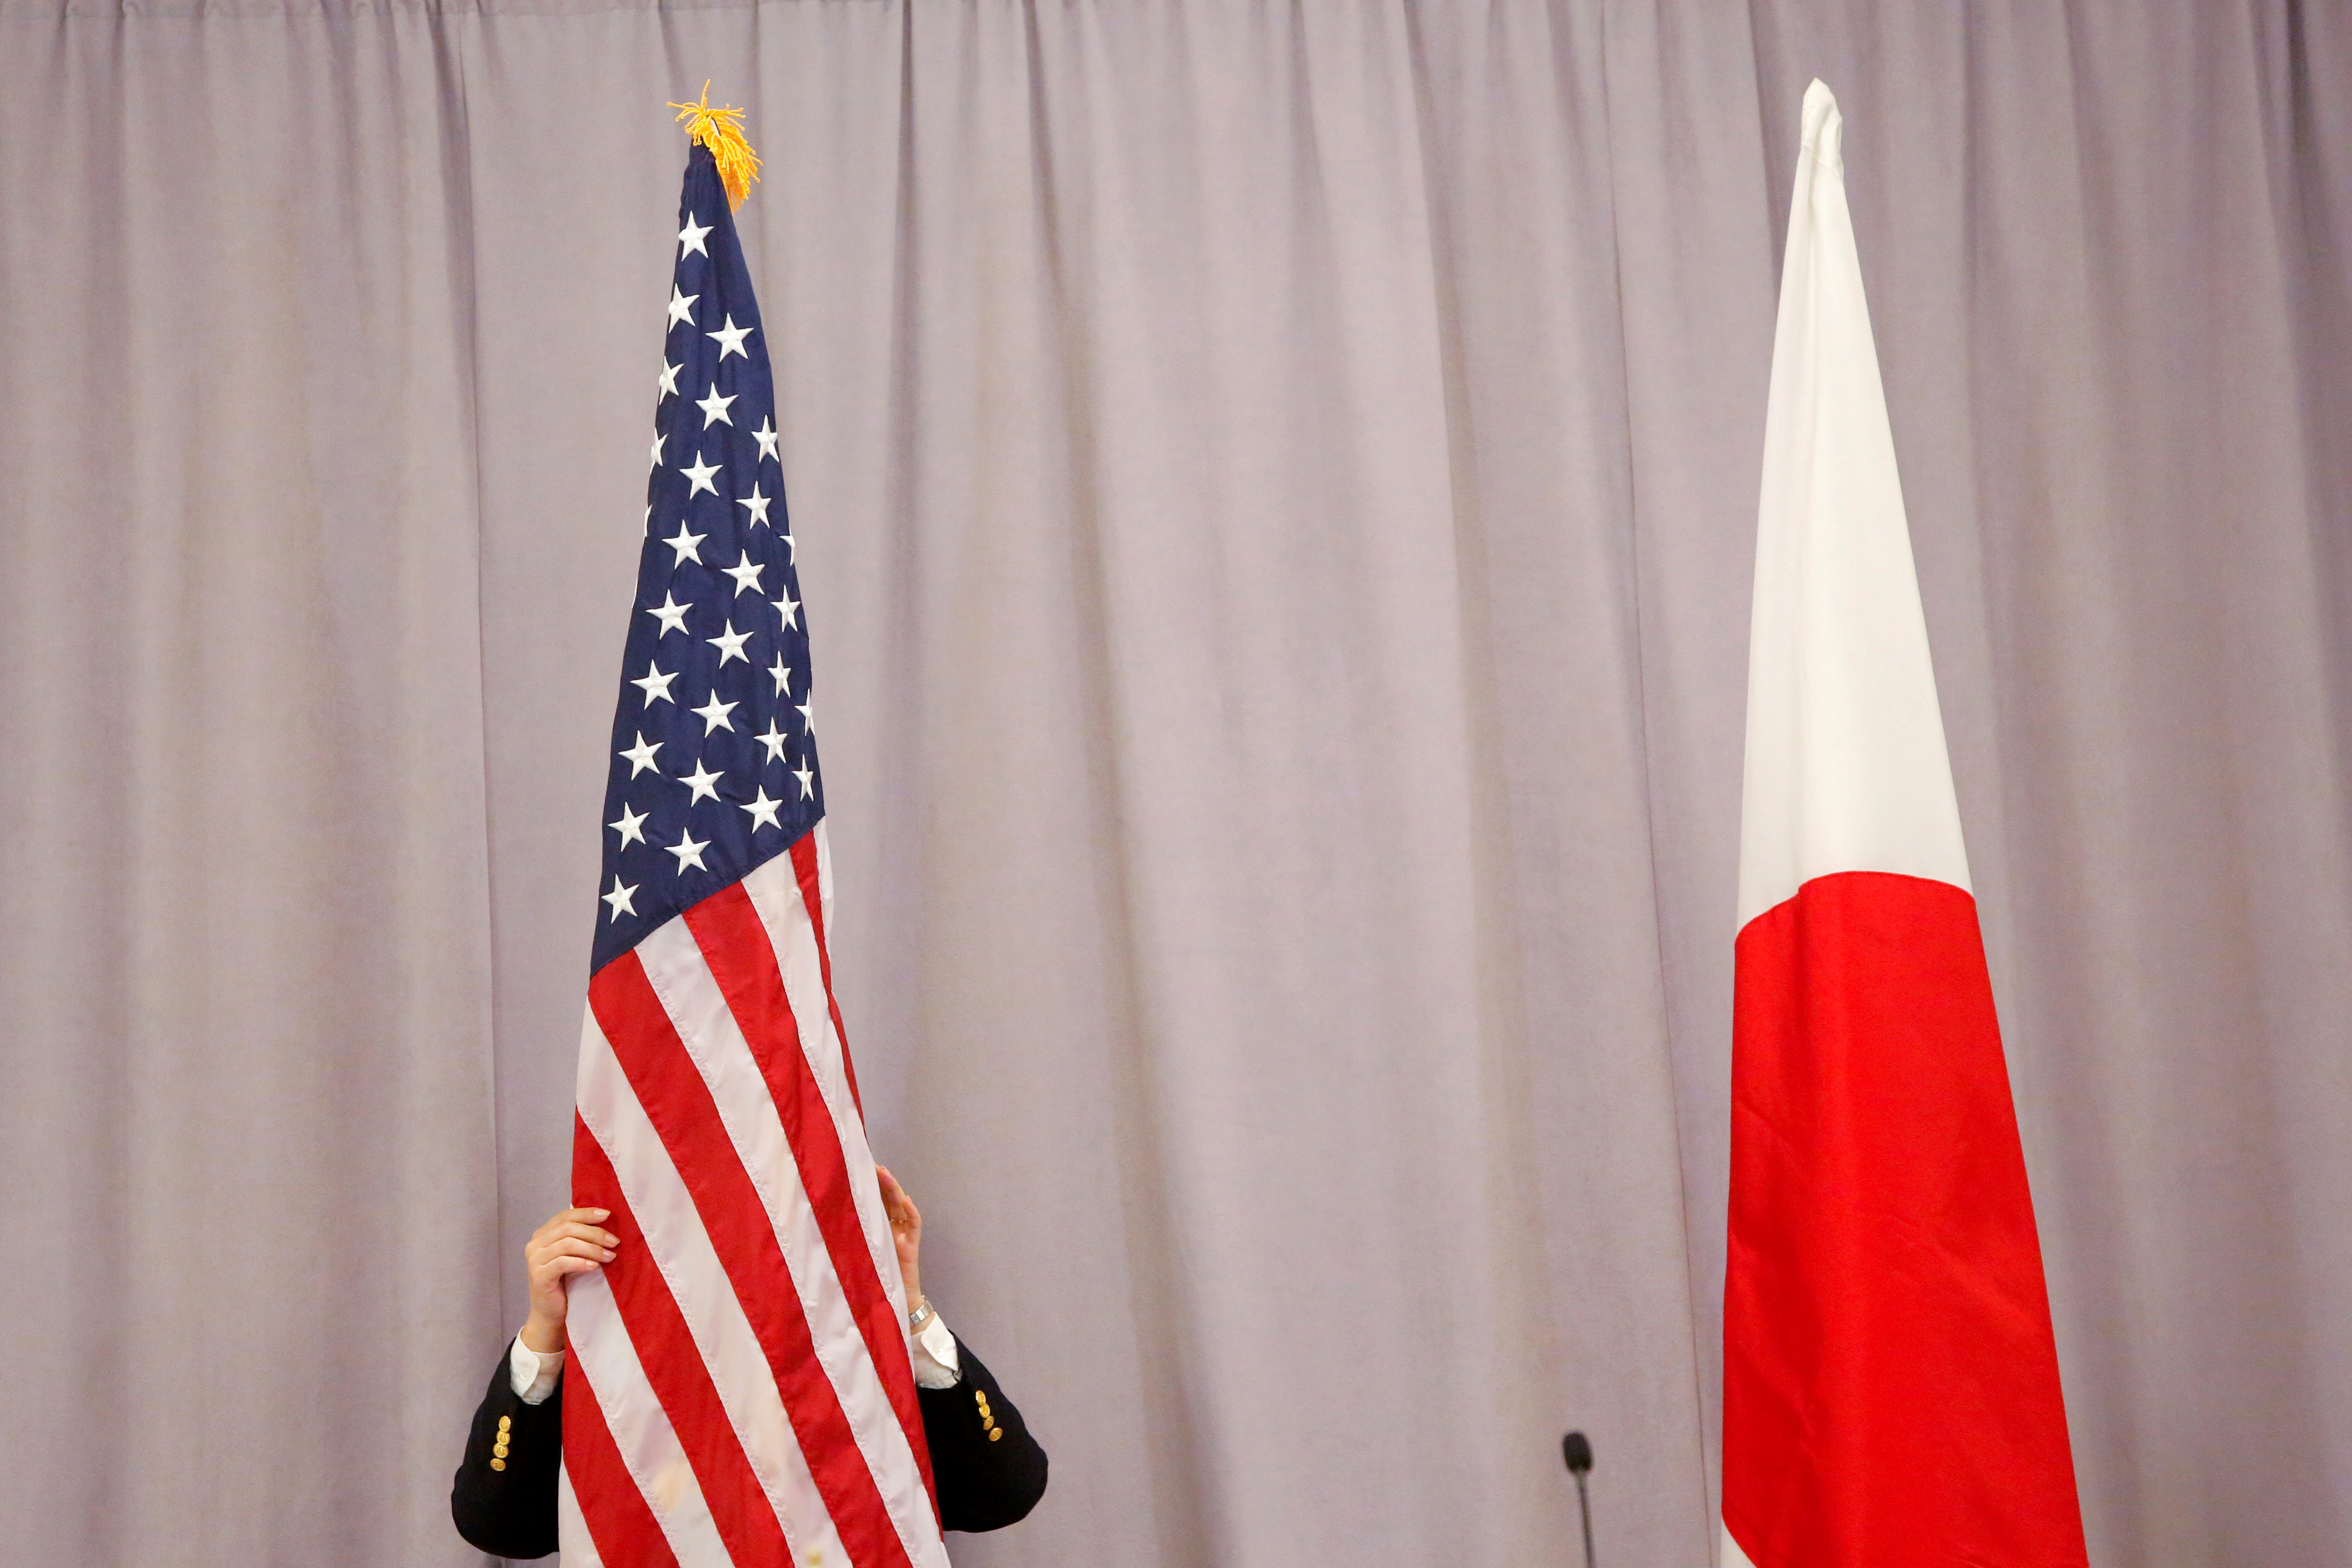 wA worker adjusts the U.S. flag before Japanese Prime Minister Shinzo Abe addresses media following a meeting with President-elect Donald Trump in Manhattan, New York, U.S.